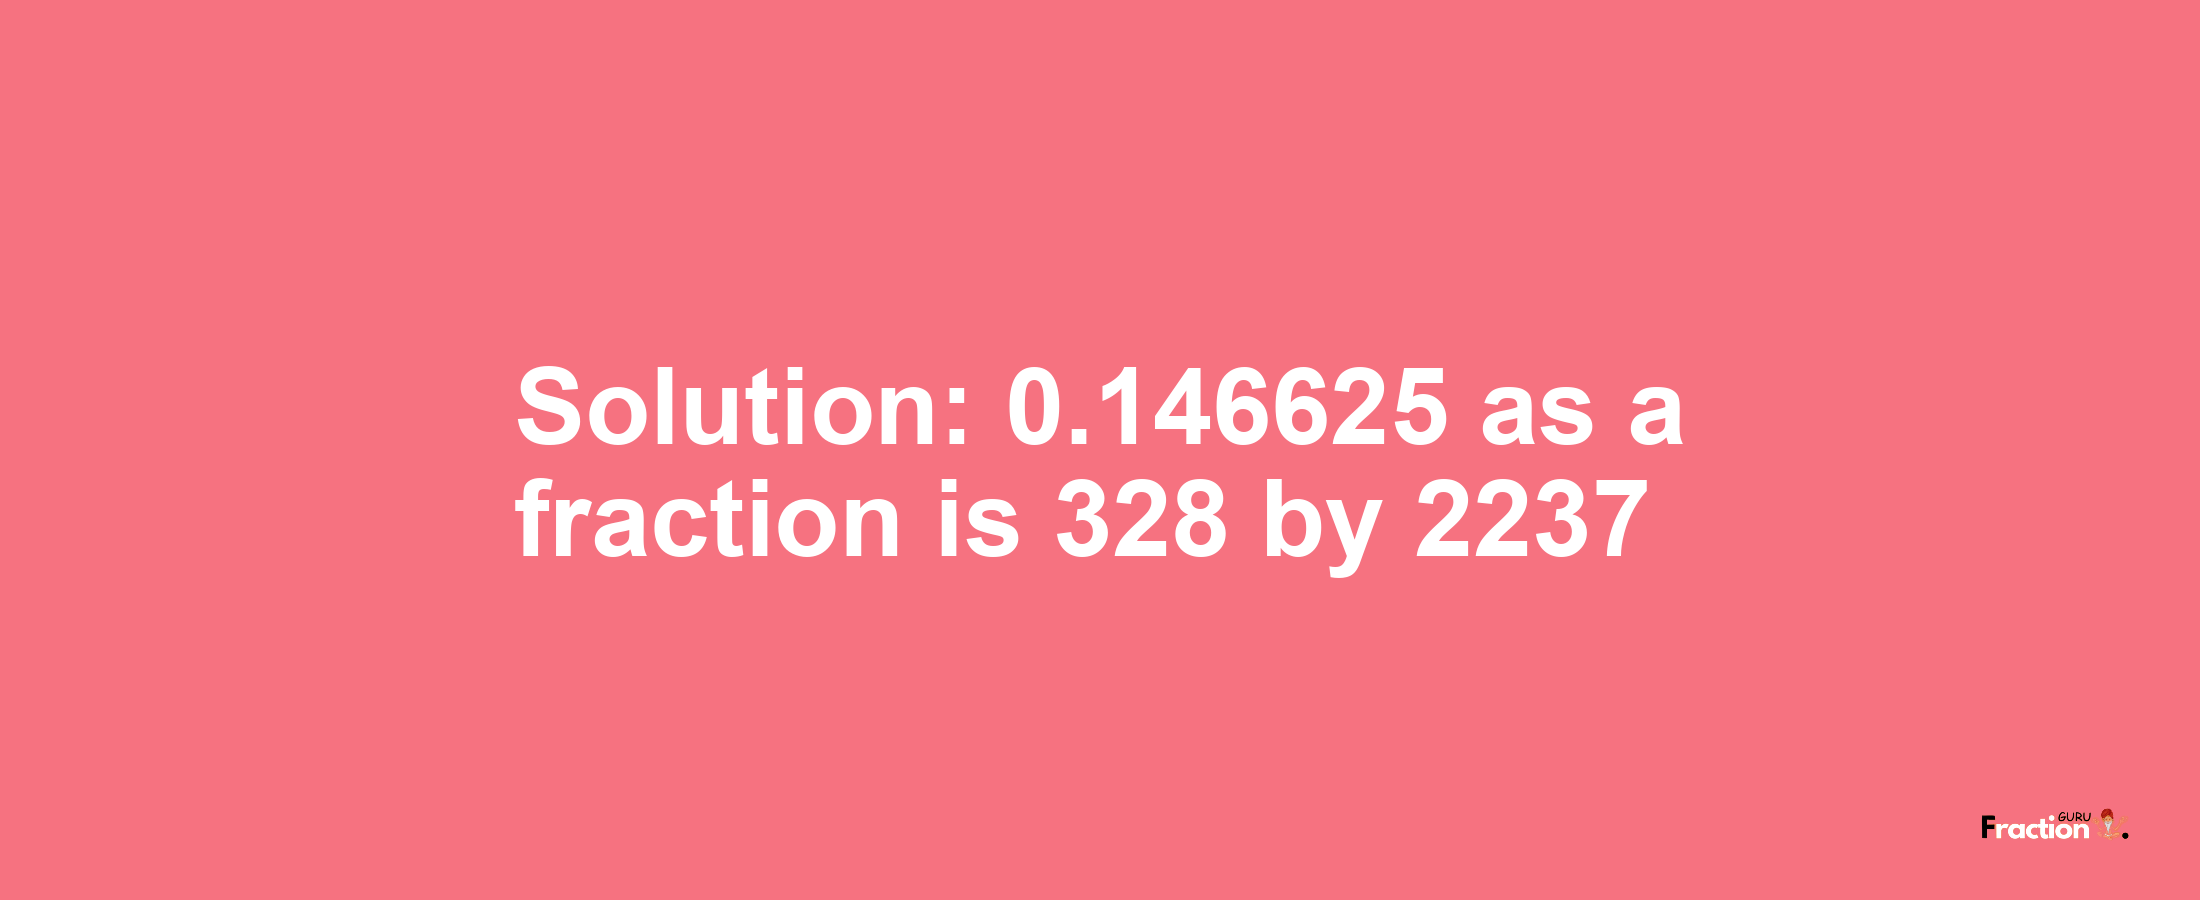 Solution:0.146625 as a fraction is 328/2237